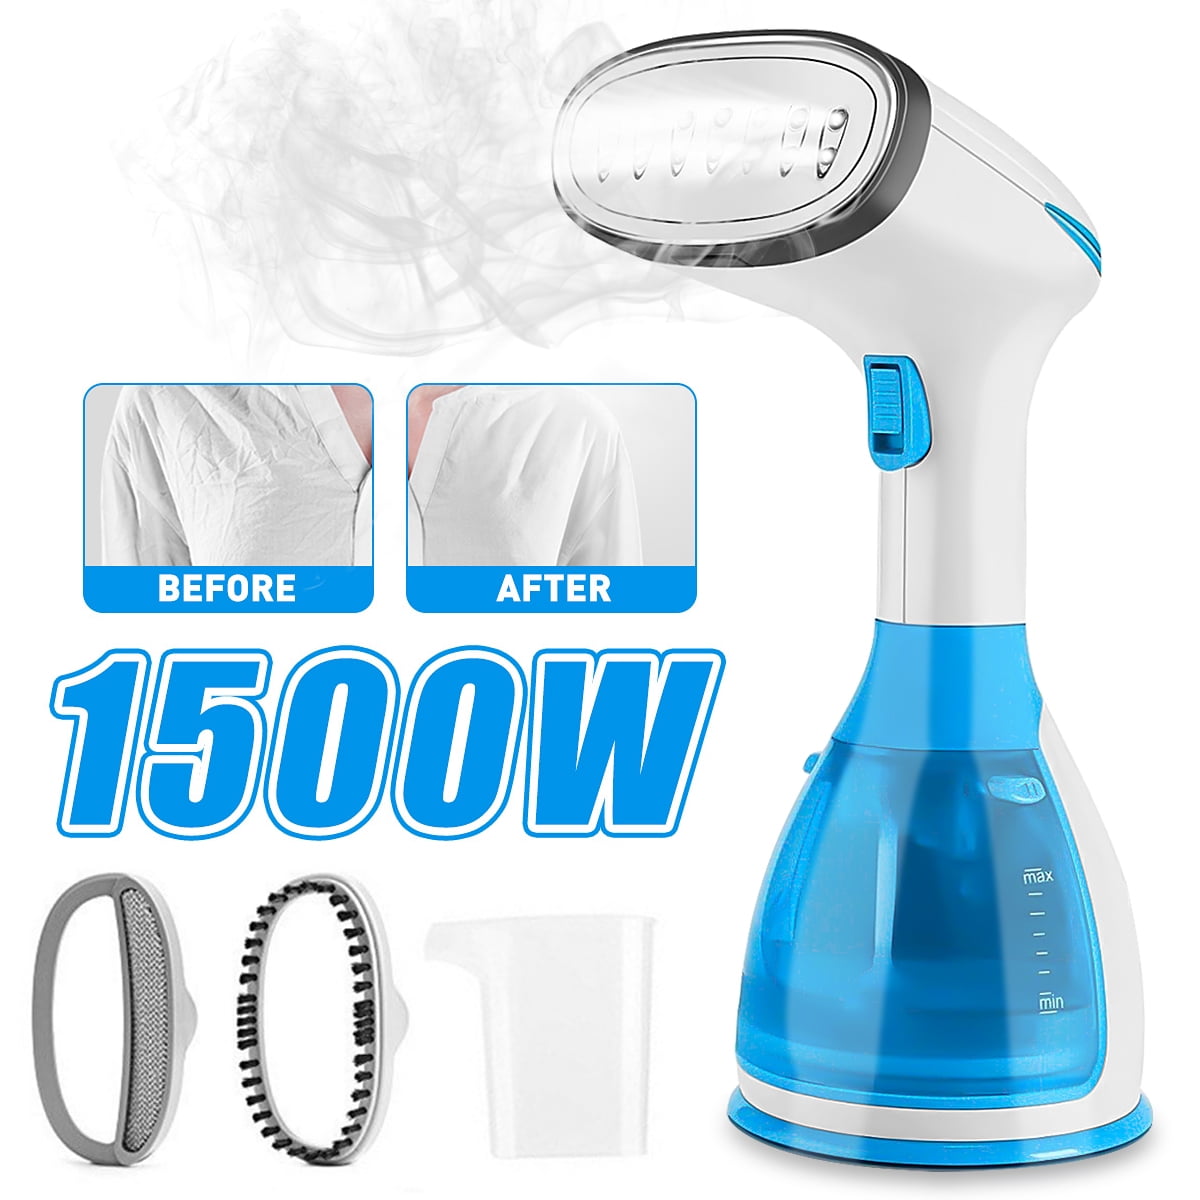 Clothes Portable Steam Iron Home Handheld Fabric Laundry Steamer Brush Travel 